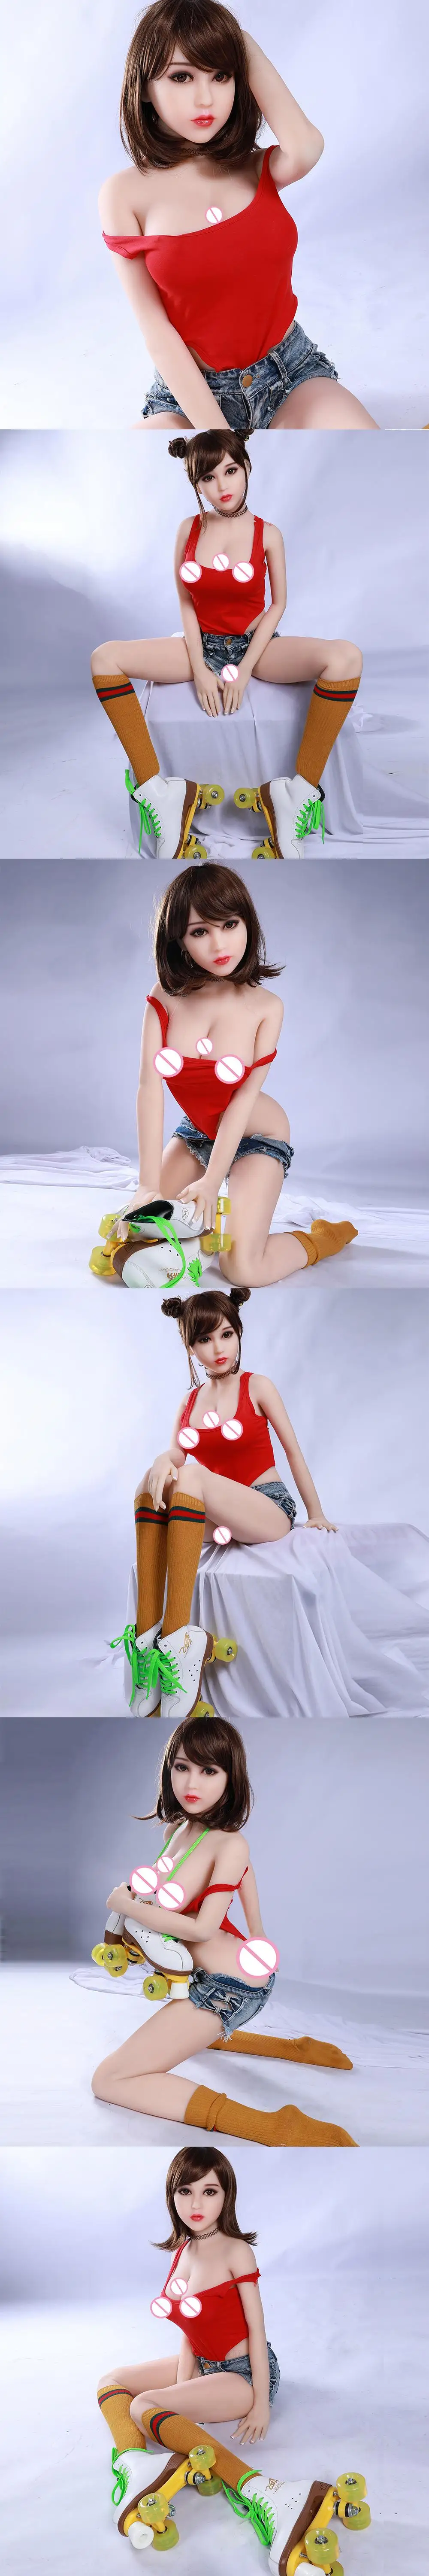 SD8926 Fast Shipping Cheapest Customized Medium Boobs Sex doll For Men Wholesale Supply